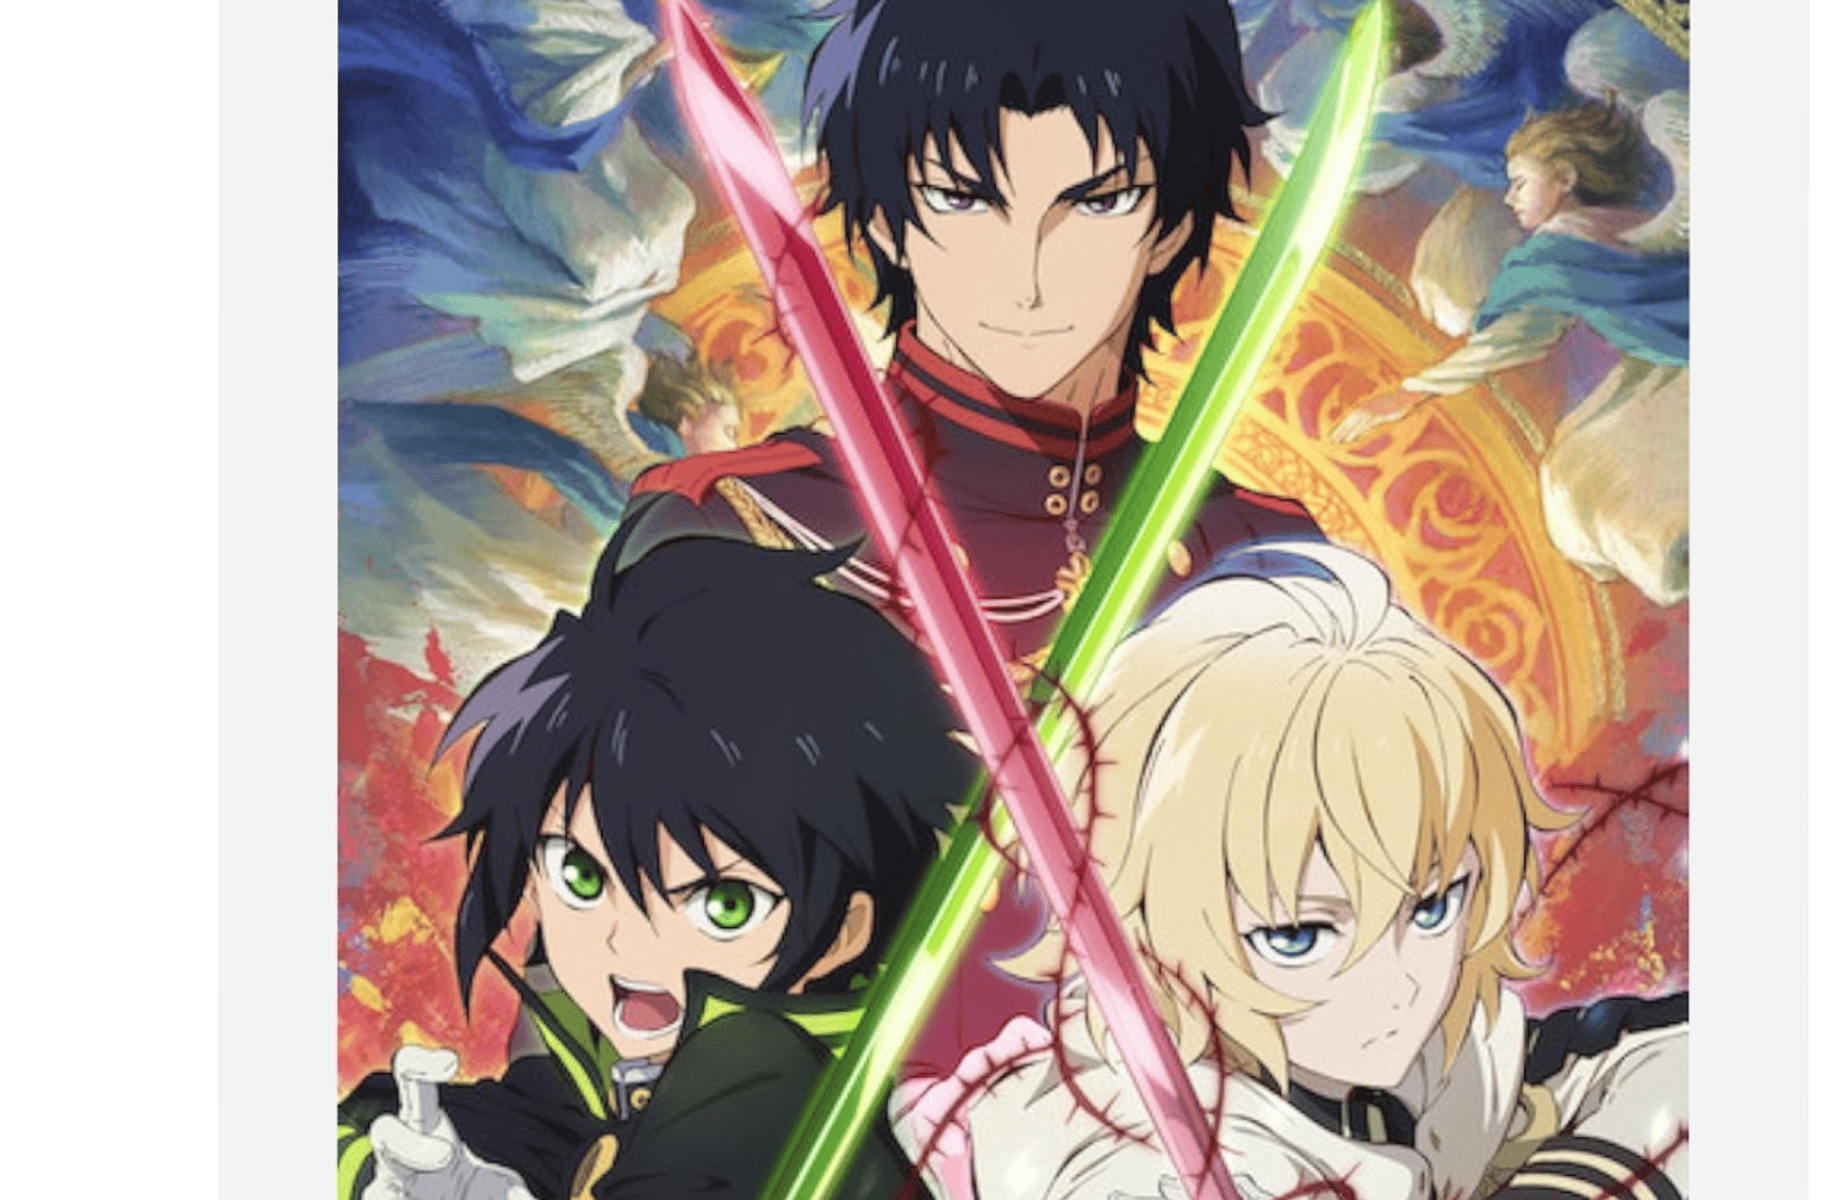 Seraph of the end